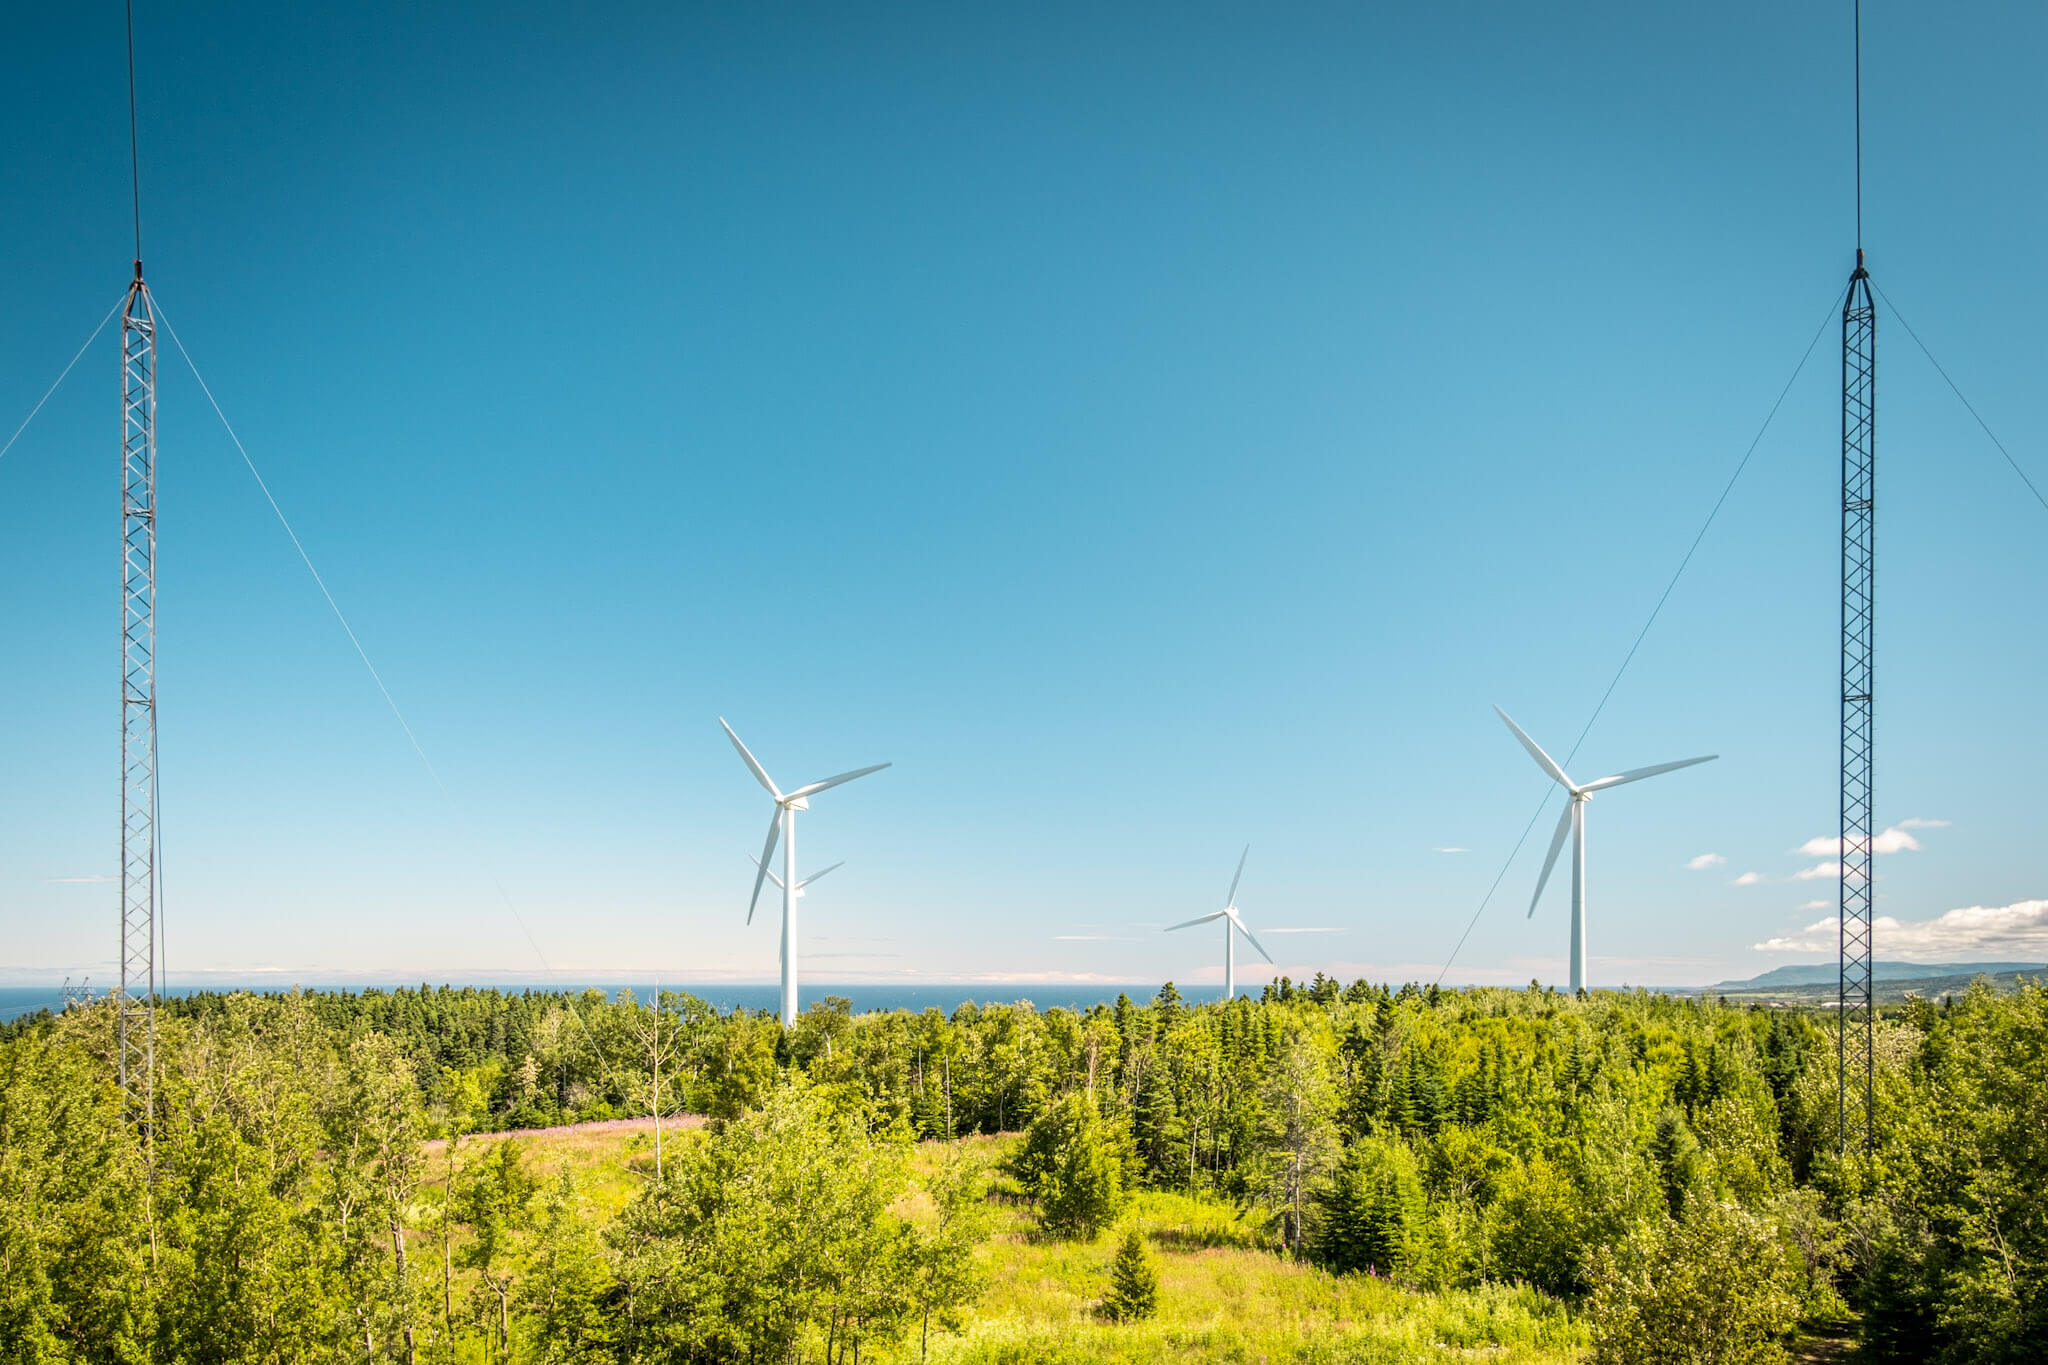 Wind turbine farm with stunning views atop the hills of Cap-Chat, Quebec